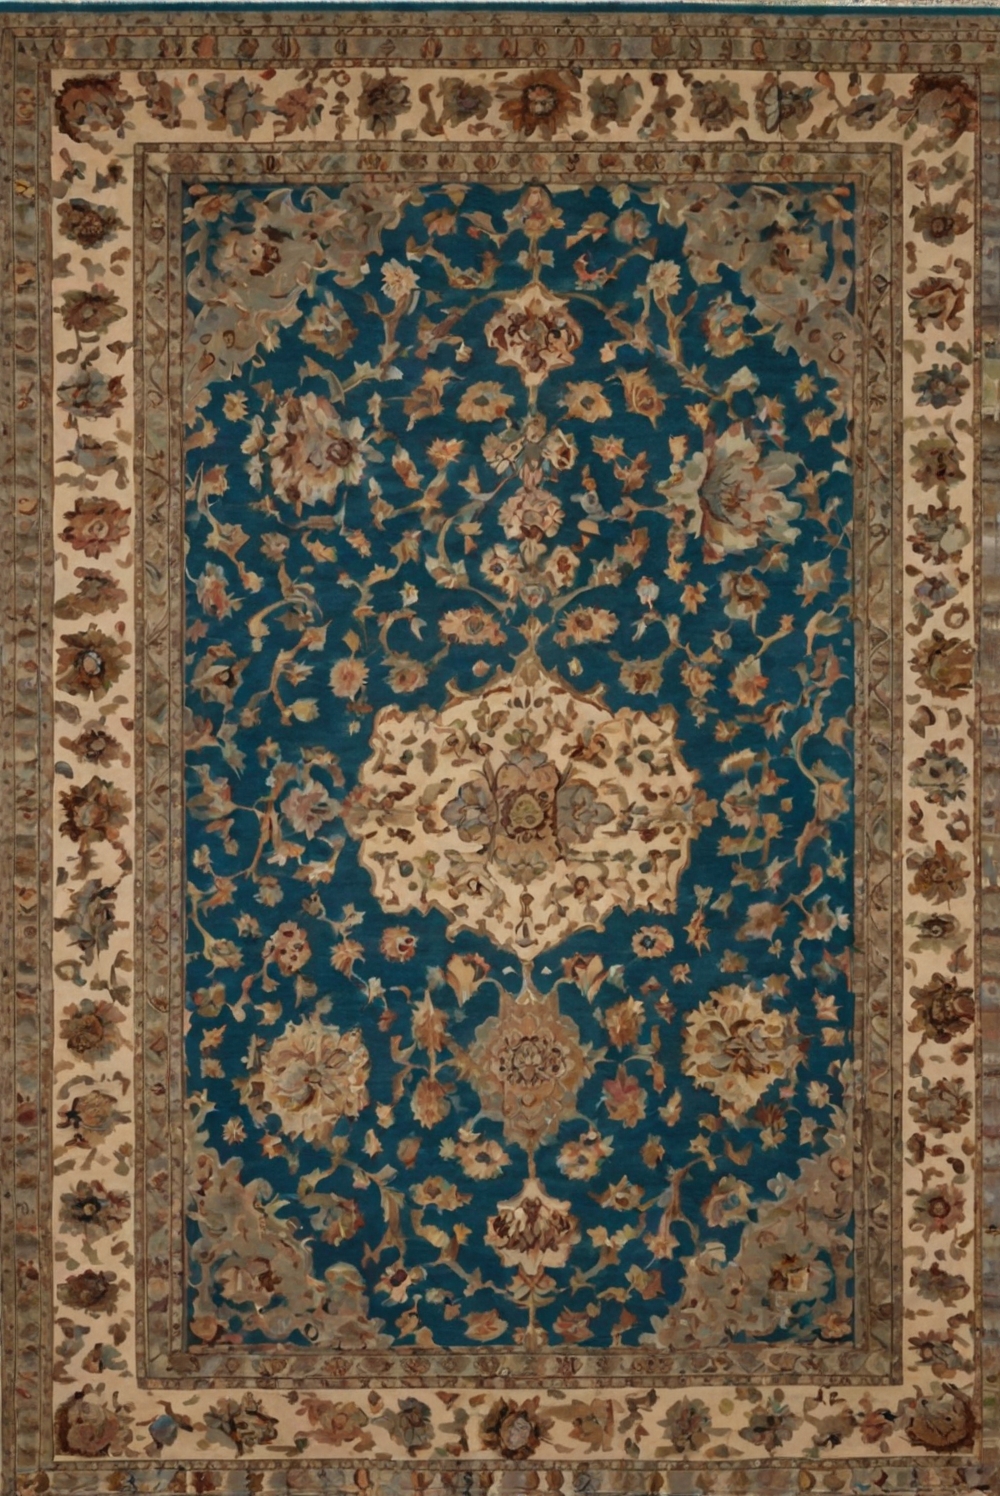 area rug styles, traditional rug, Persian rugs, vintage rugs, oriental rugs, Turkish rugs, hand-knotted rugs